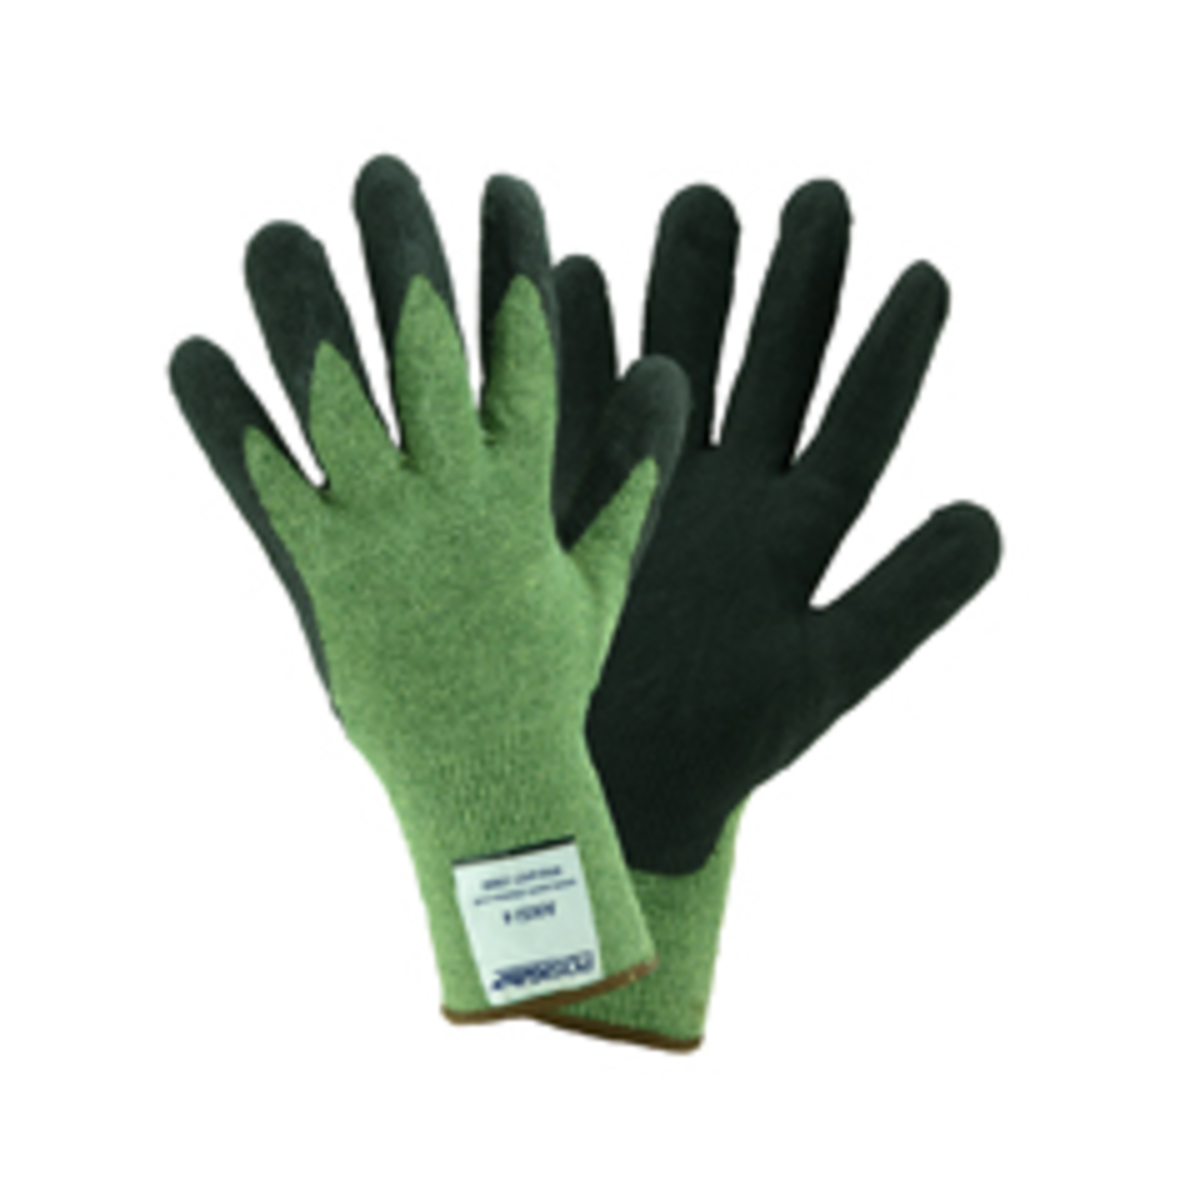 PIP® Large PosiGrip® 13 Gauge Dupont™ Kevlar® And Steel Cut Resistant Gloves With Micro-Foam Nitrile Coating